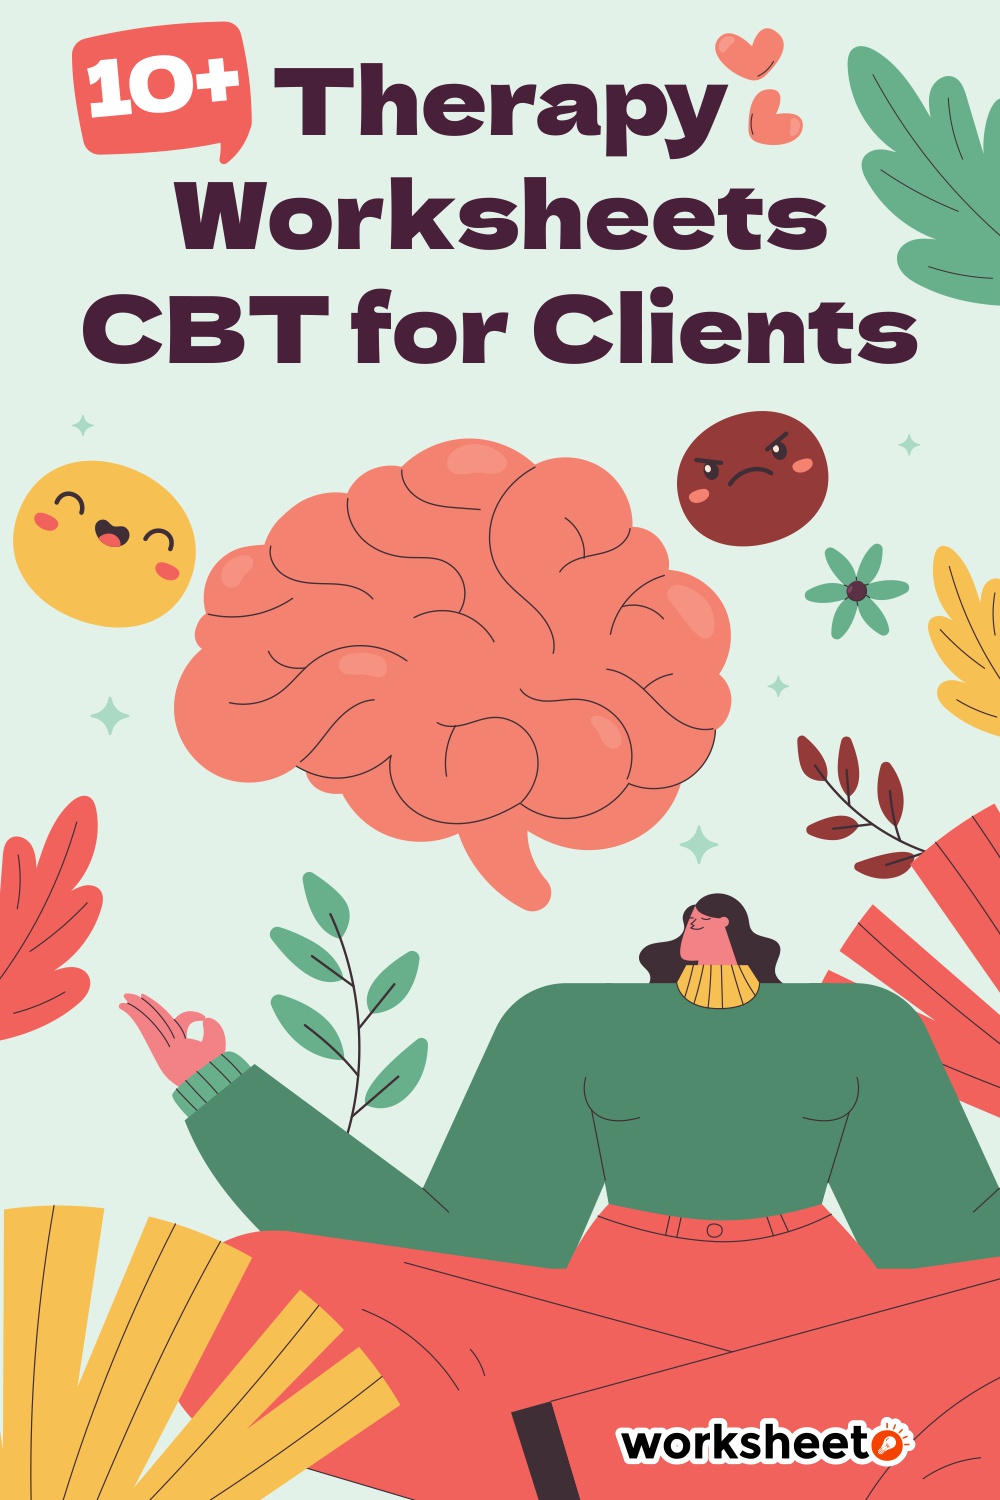 15 Images of Therapy Worksheets CBT For Clients